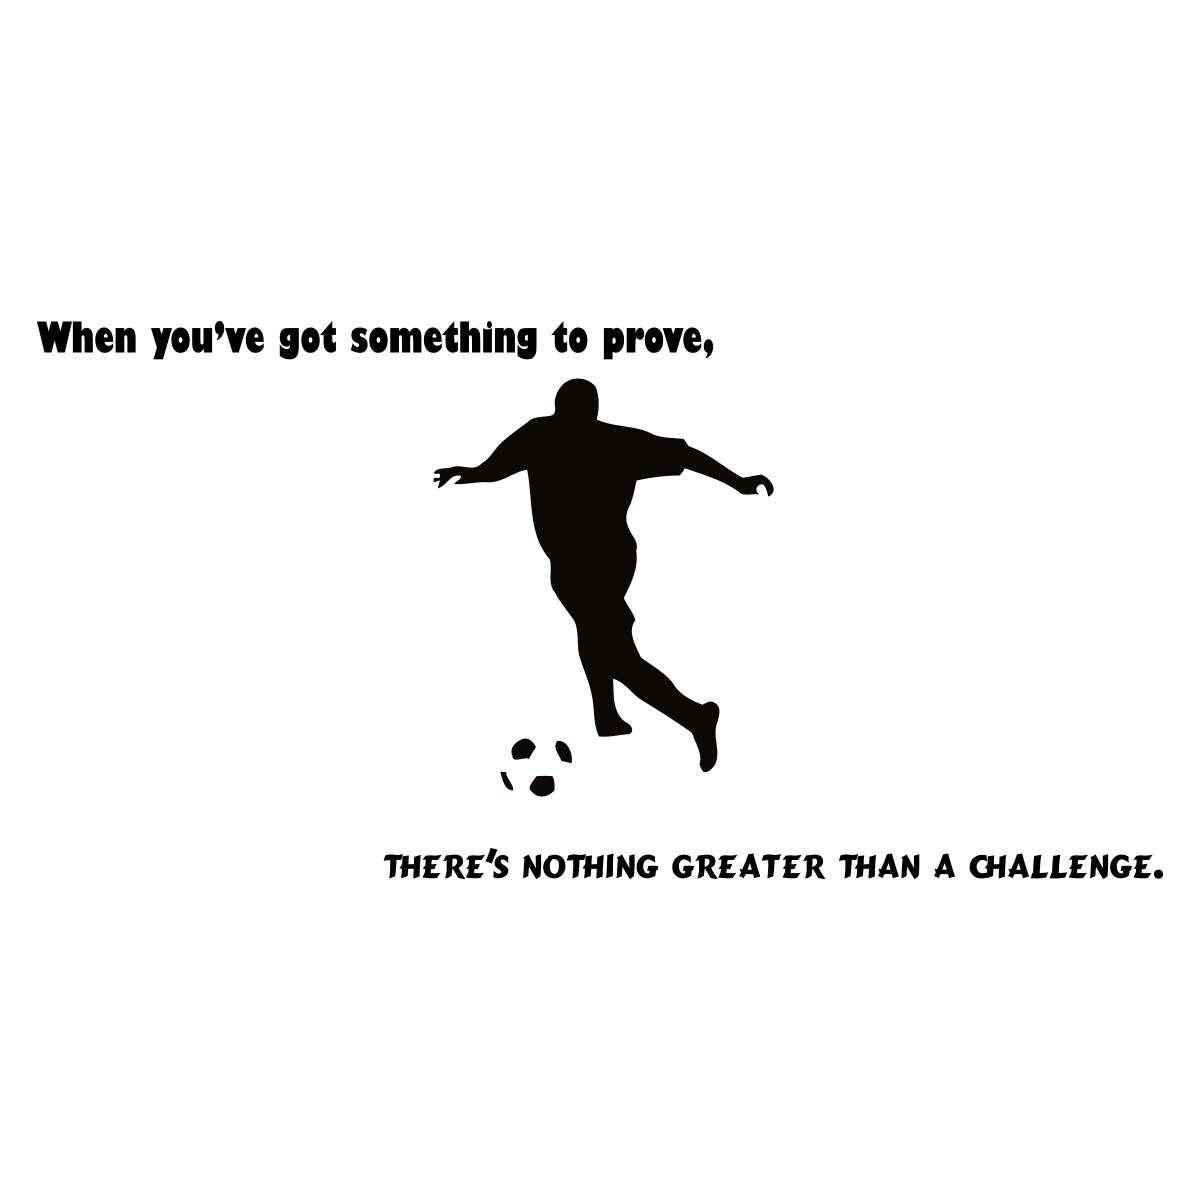 Soccer Sport Quote Black Vinyl Wall Decal Art (BlackEasy to apply with instructions includedDimensions 22 inches wide x 35 inches long )